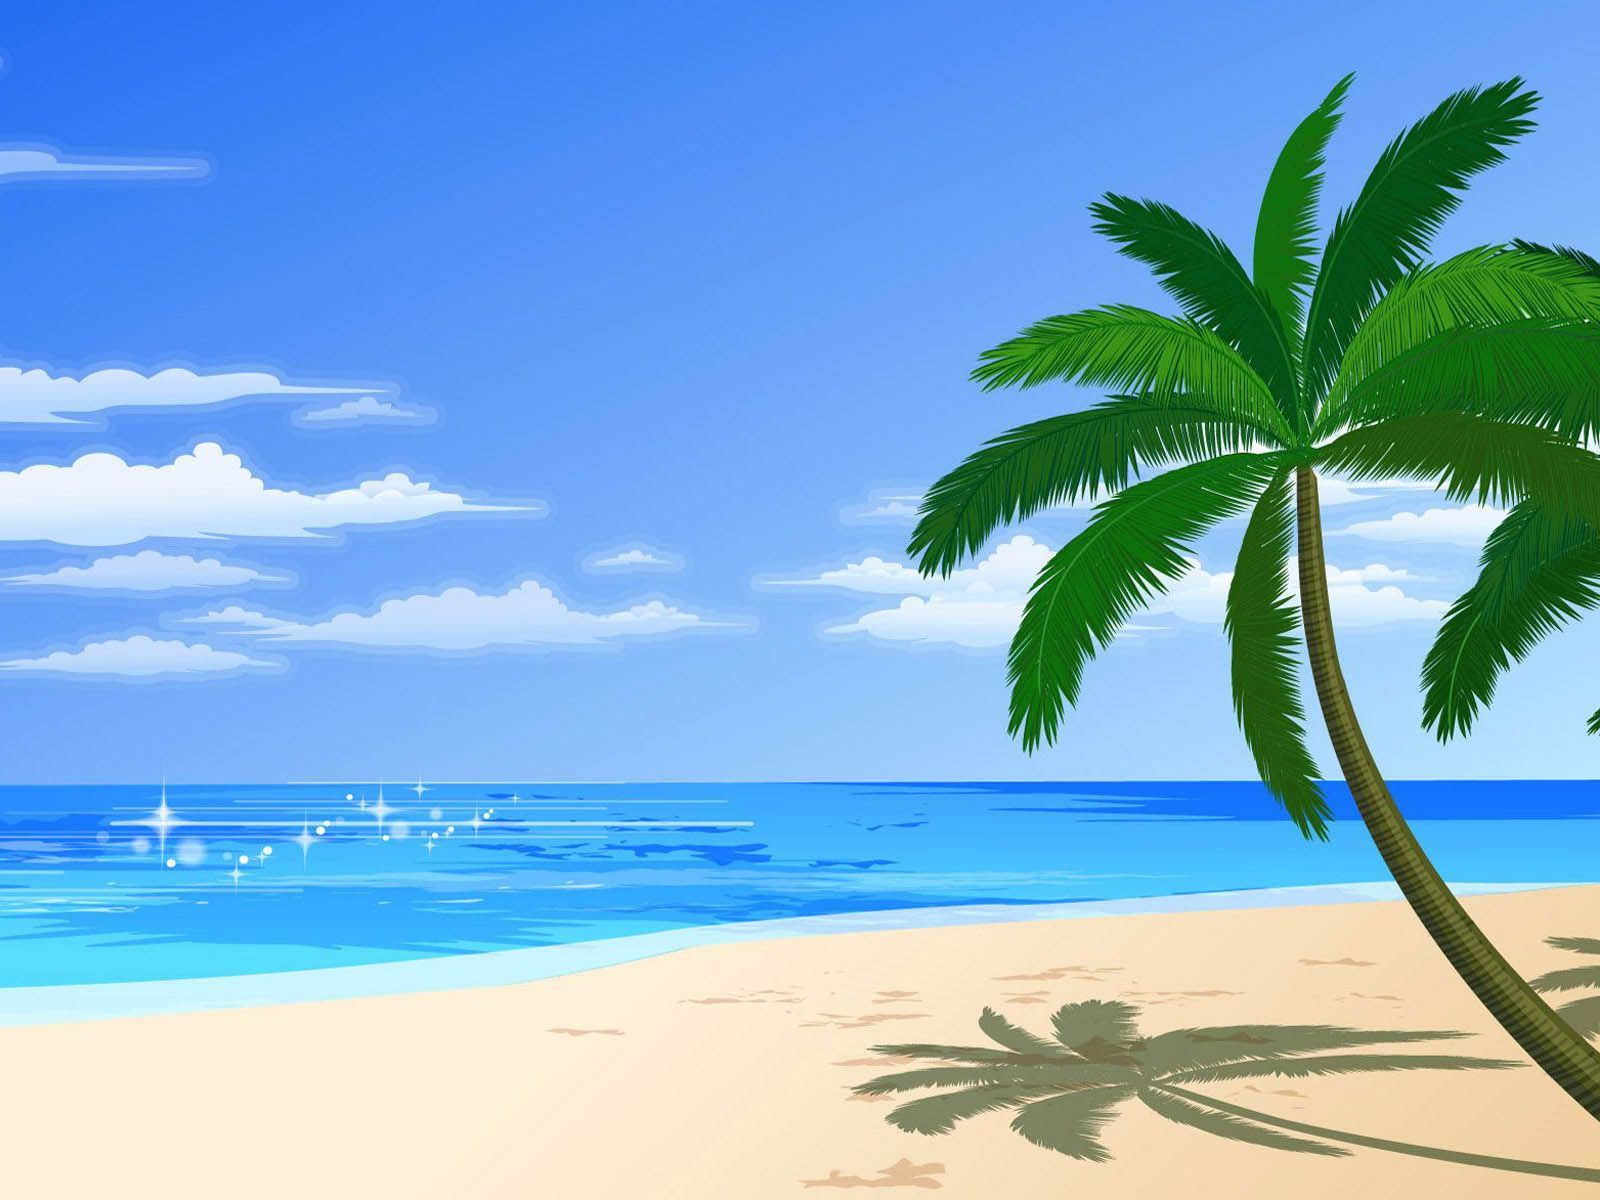 Tag Vector Beach Wallpaper Image Photo Picture And Background. Beach illustration, Beach background, Beach cartoon